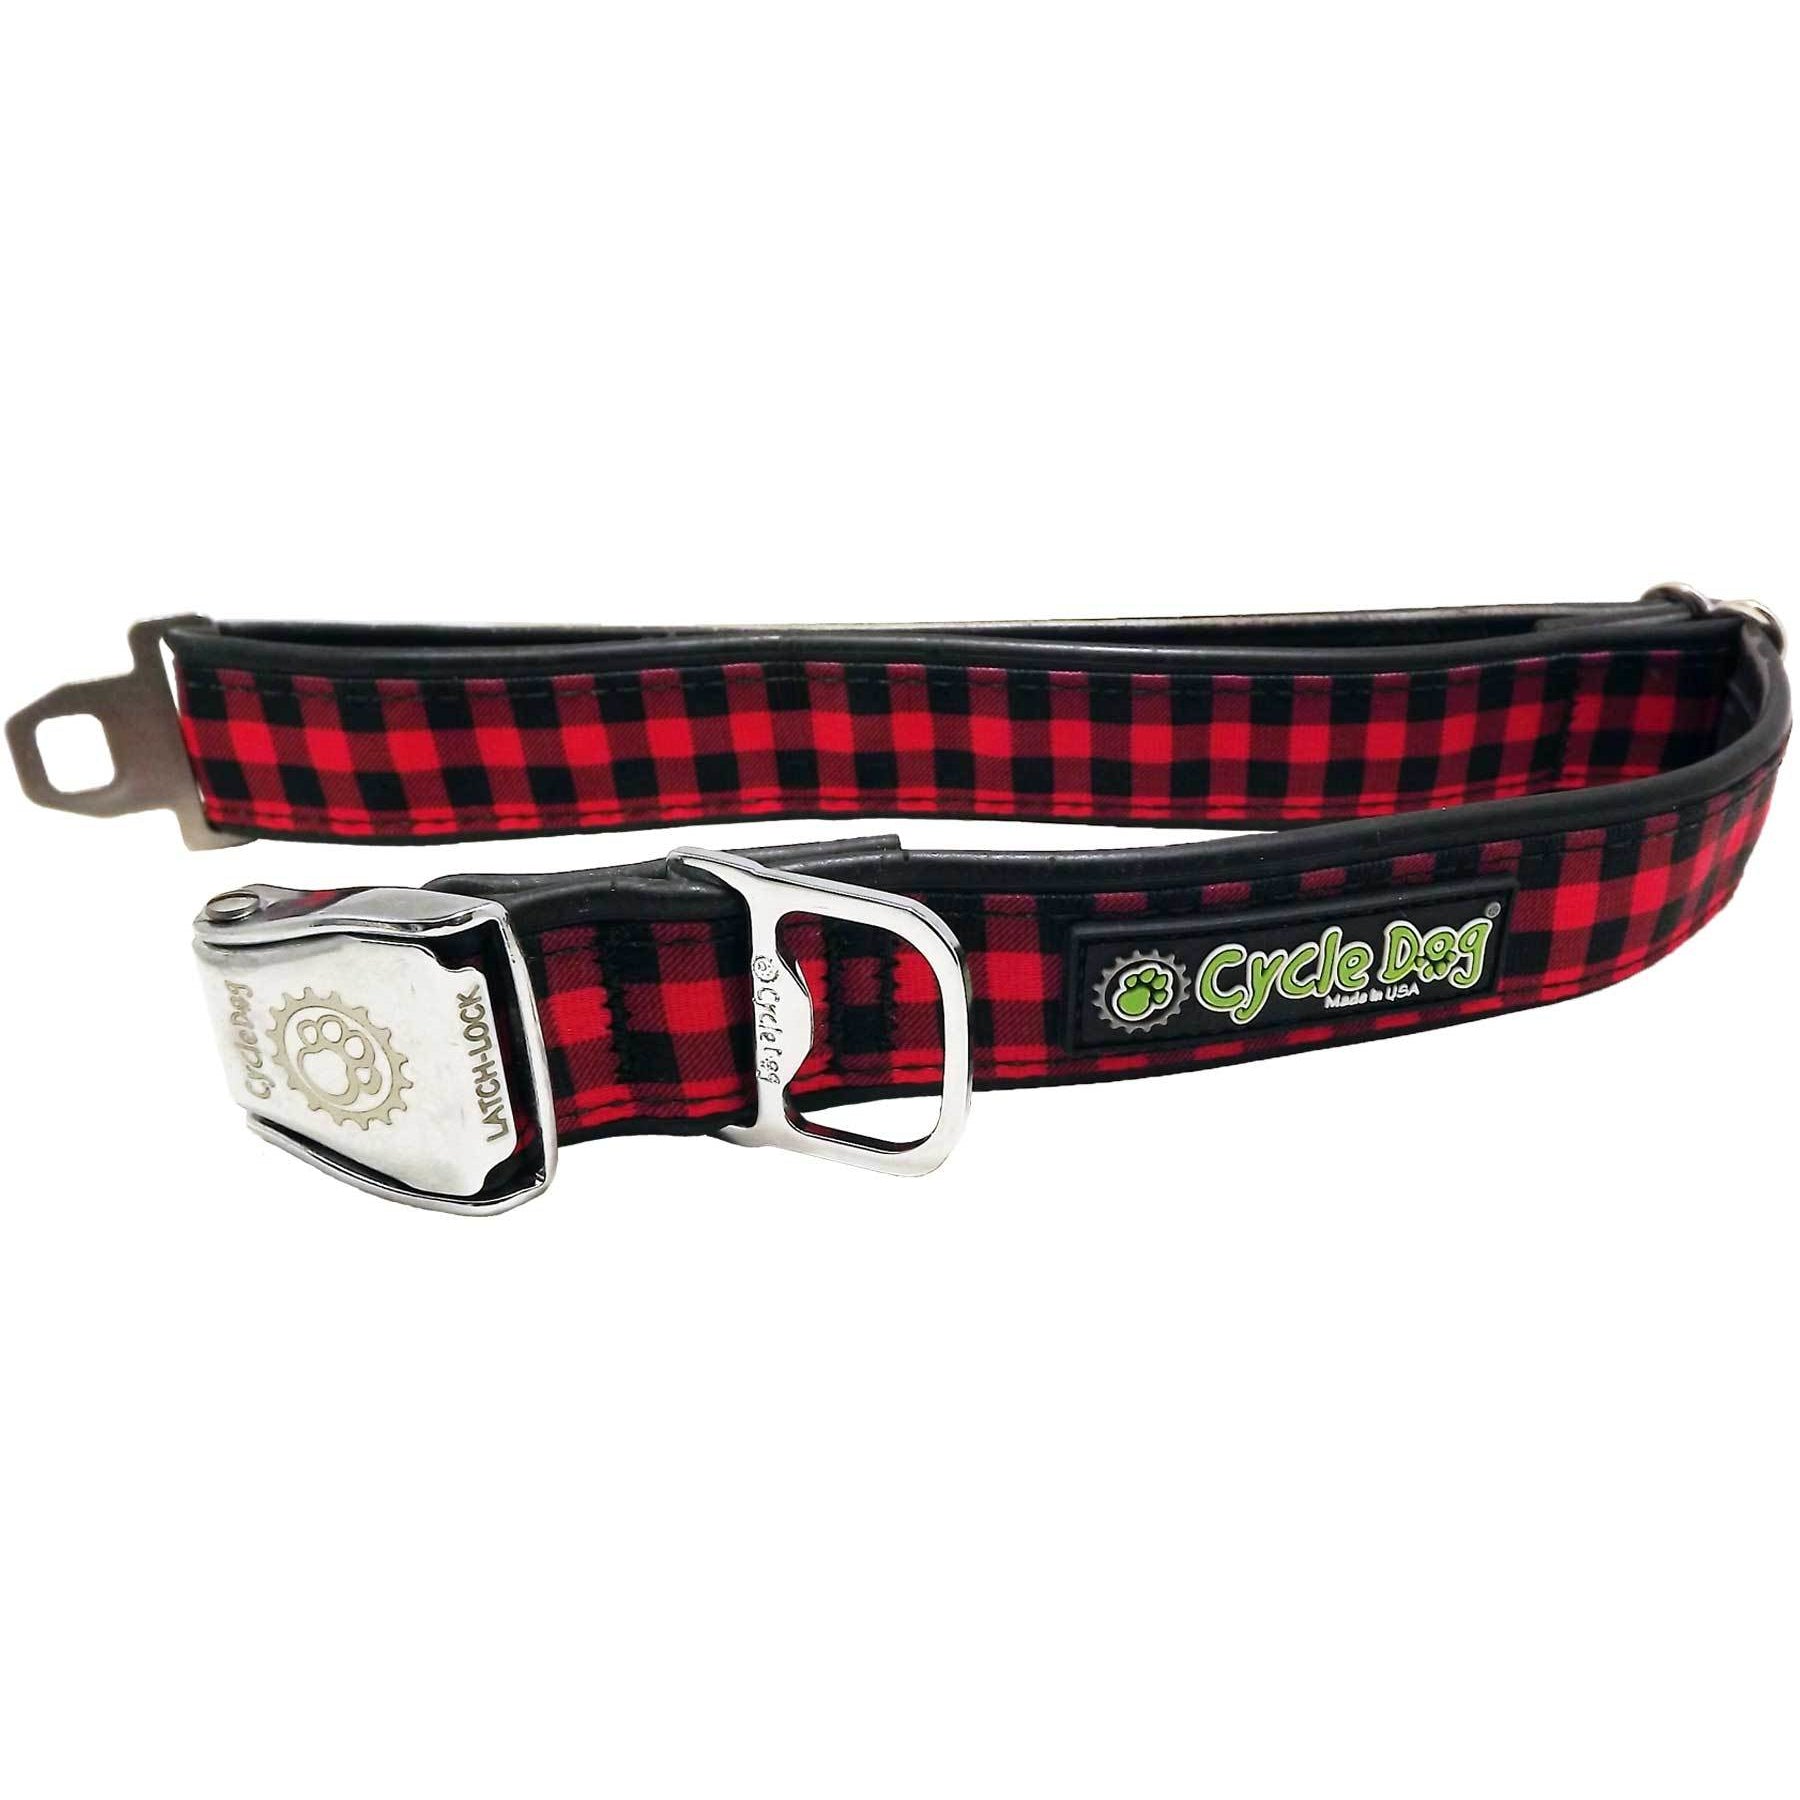 Cycle Dog - Red Plaid Collar